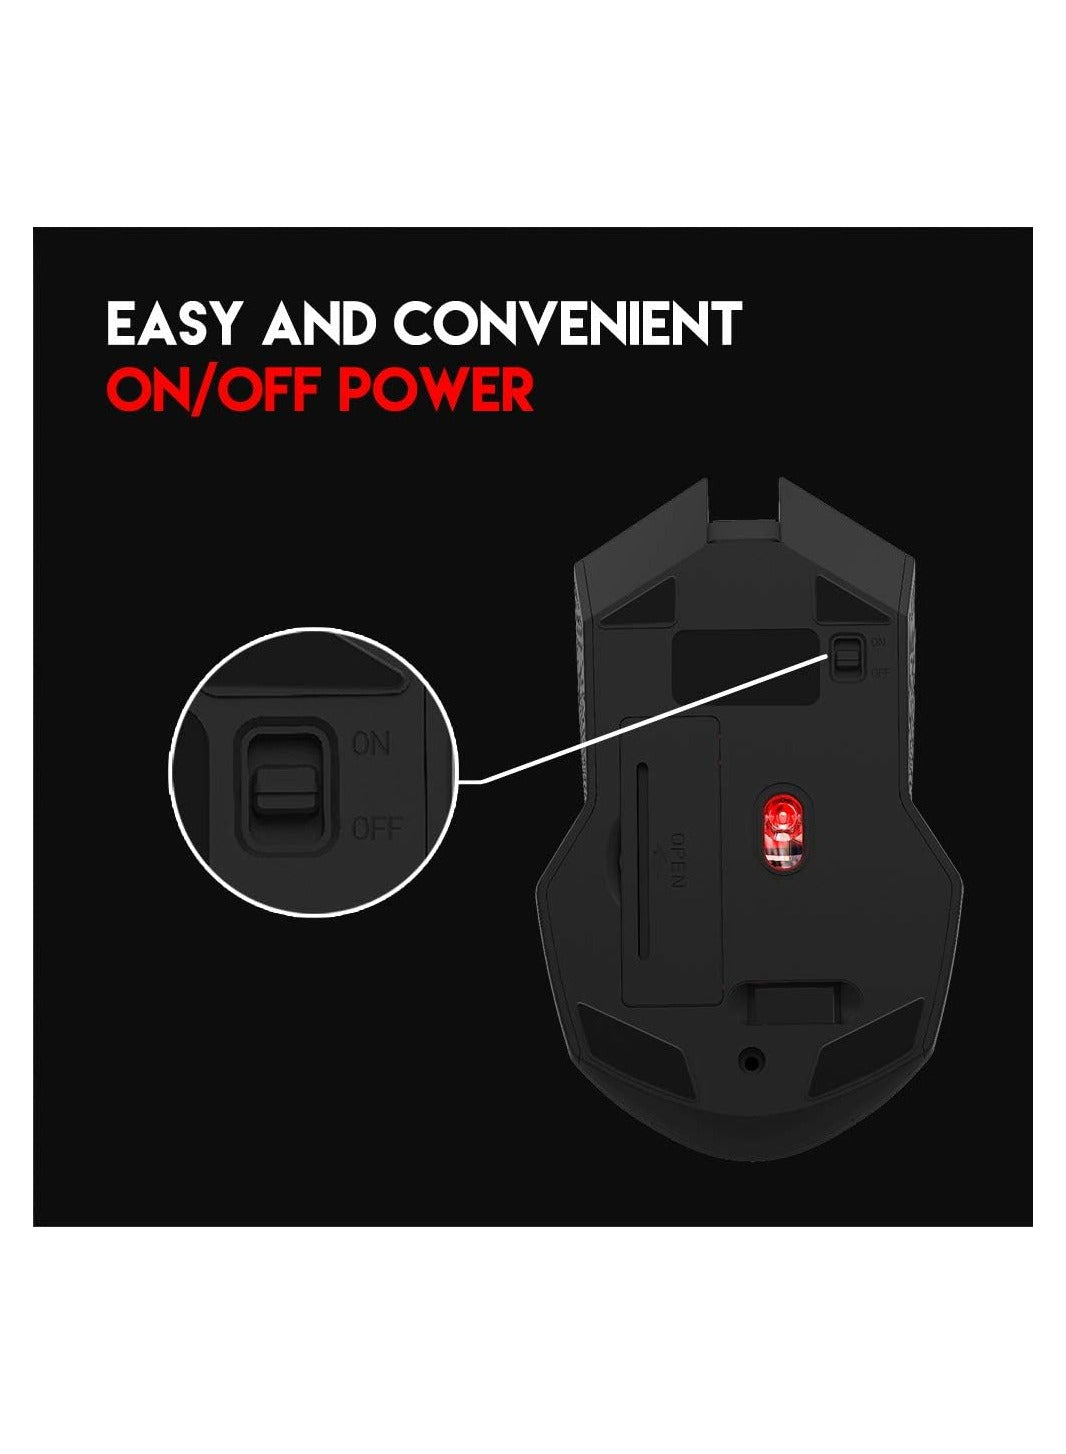 FANTECH WG10 Mouse Wireless (2.4GHZ) Gaming Mouse With USB Receiver | Optical Sensor 2,000 DPI - PC/LAPTOP/MAC